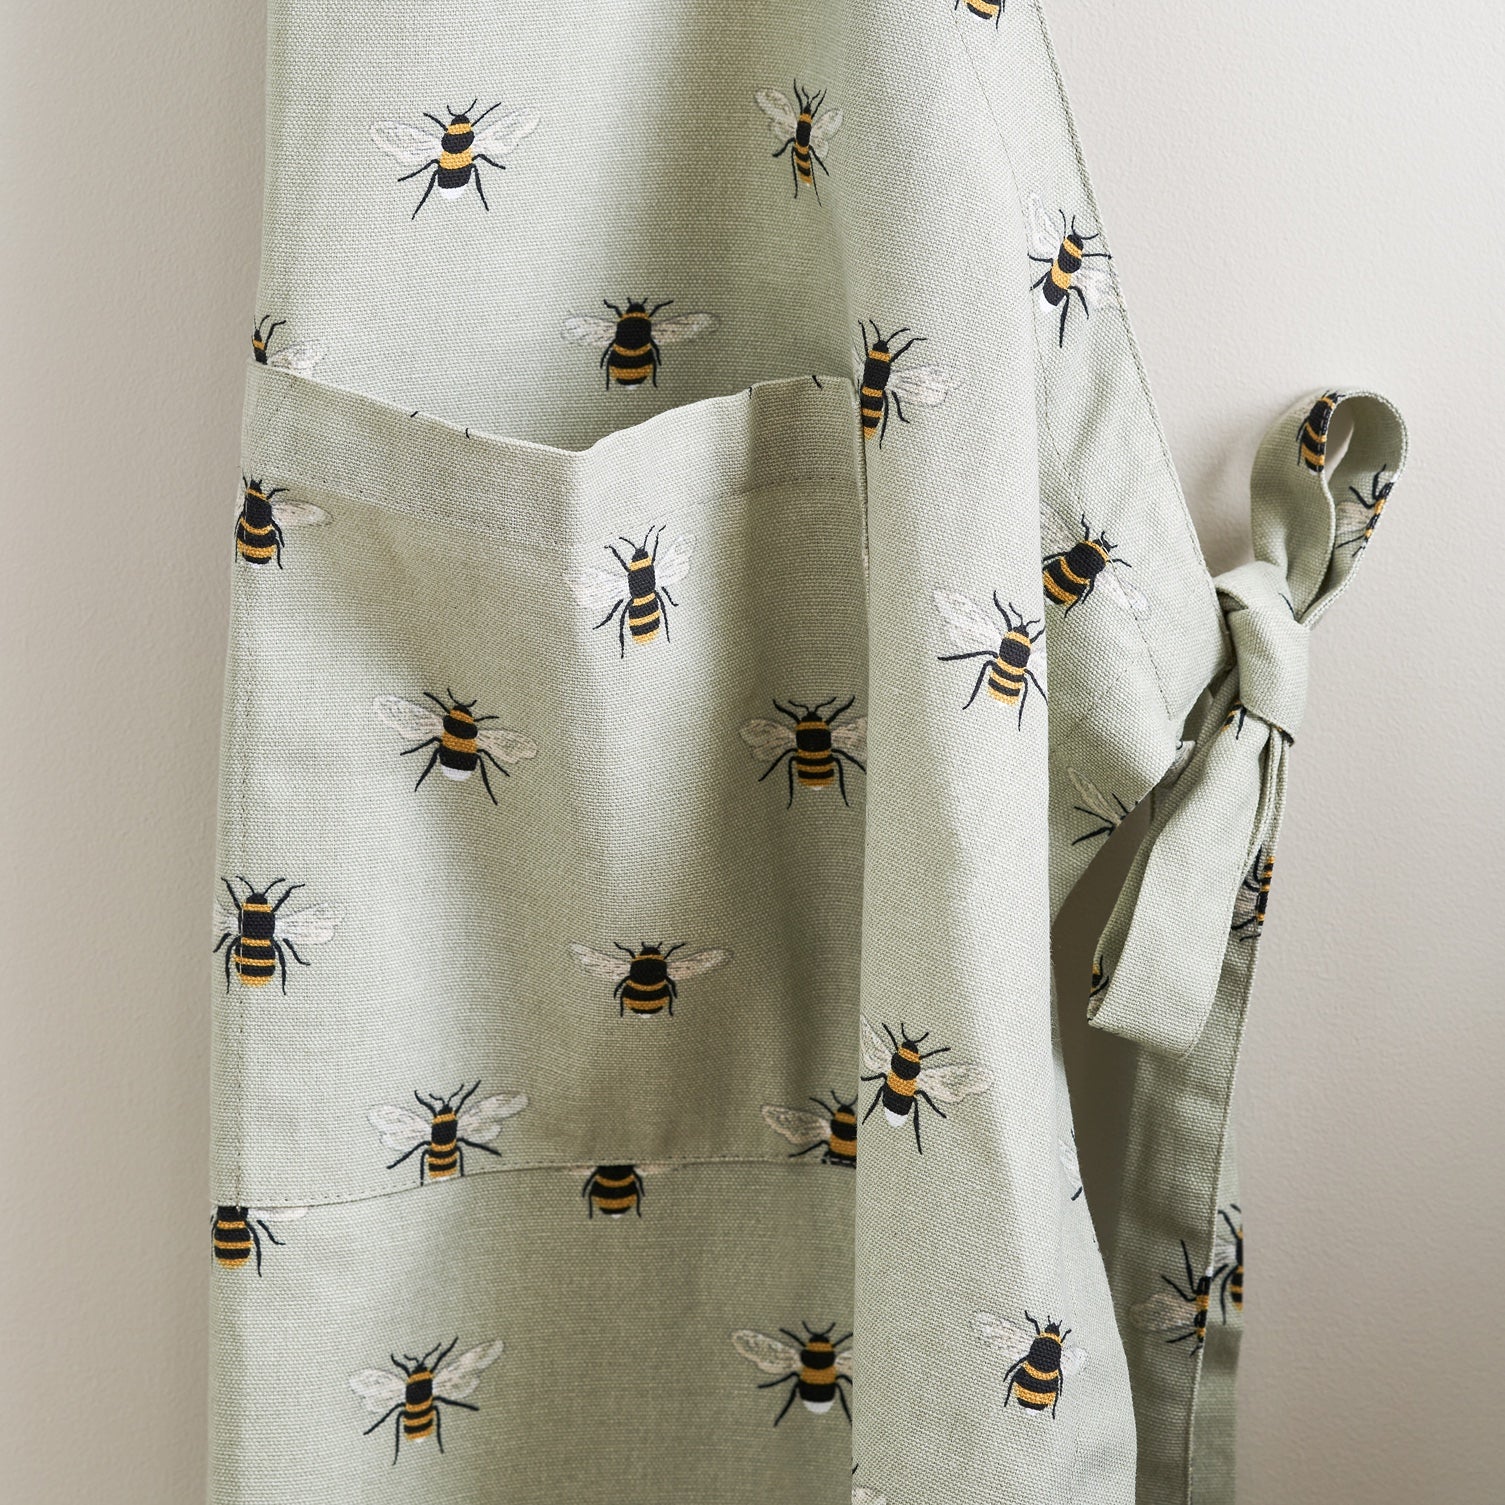 Bees Adult Apron